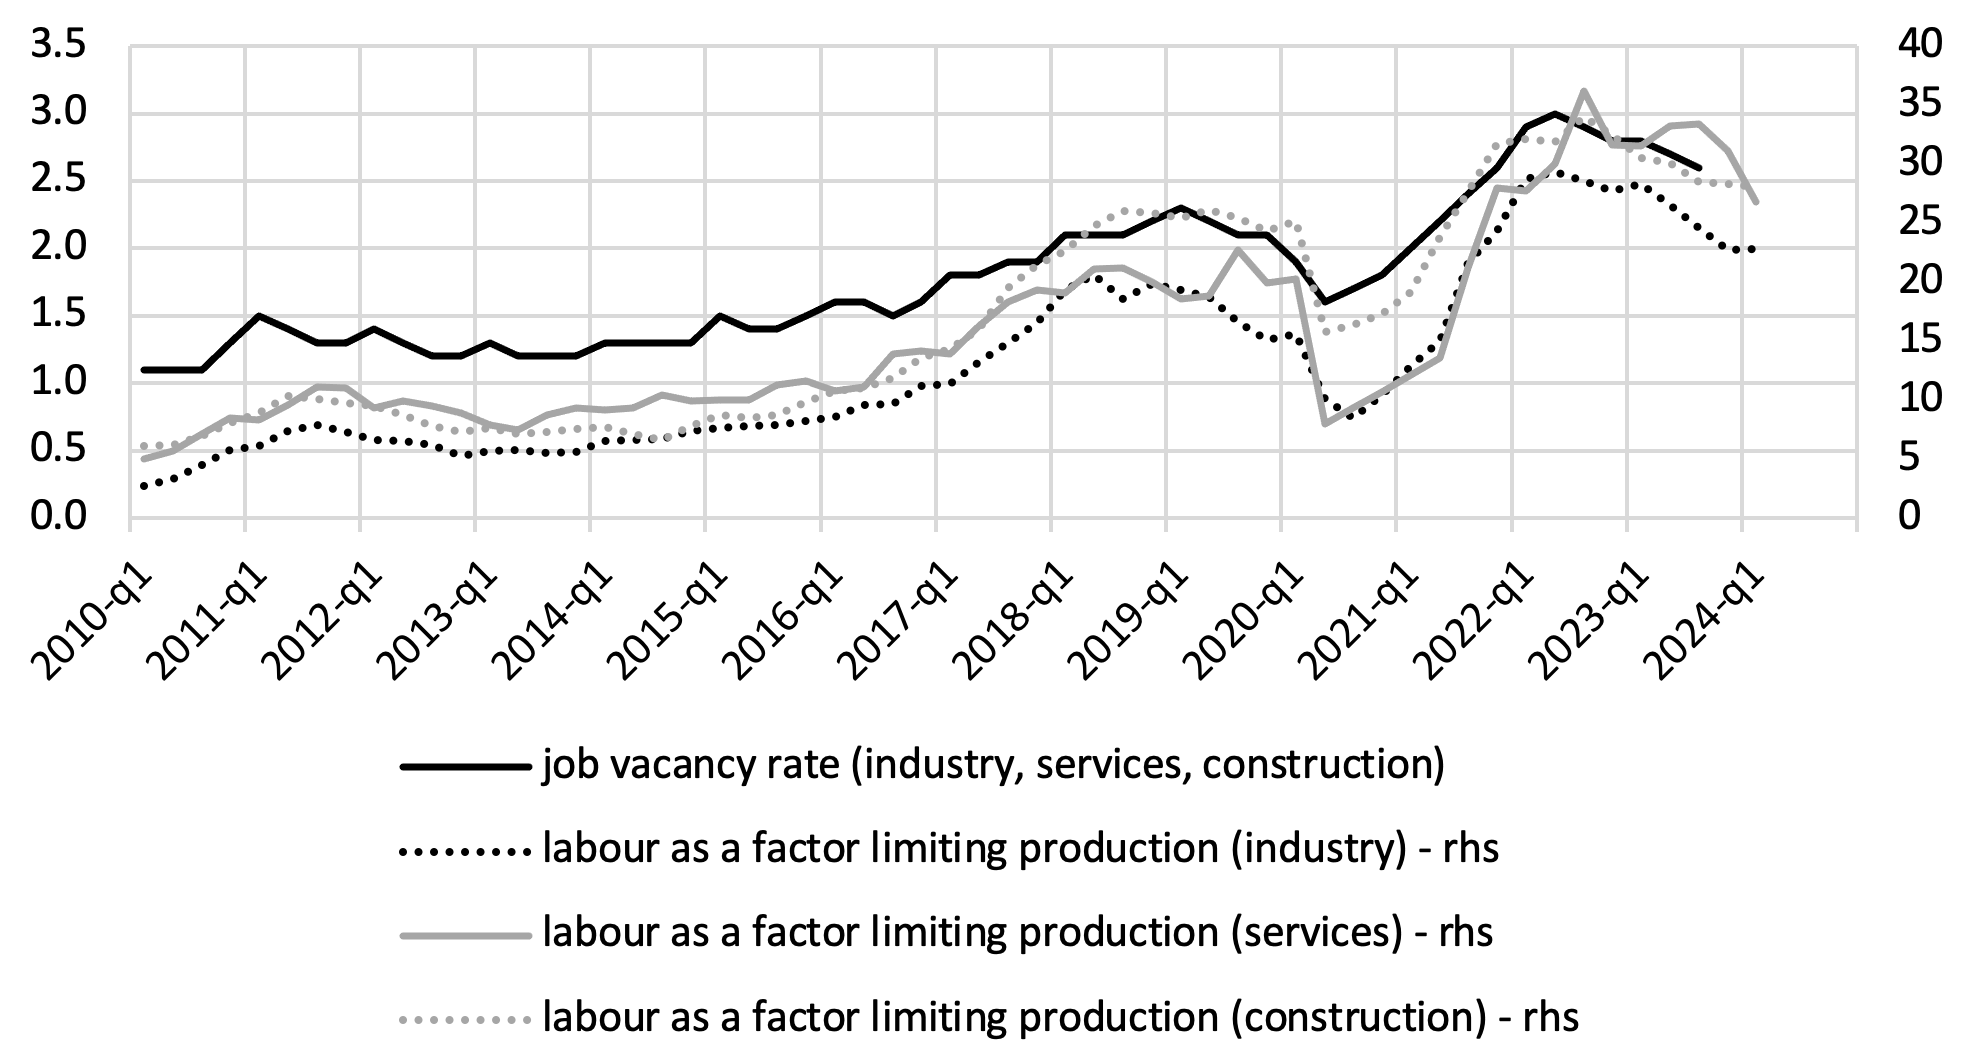 Figure 1 EU job vacancy rate and shortage of labour as a factor limiting production